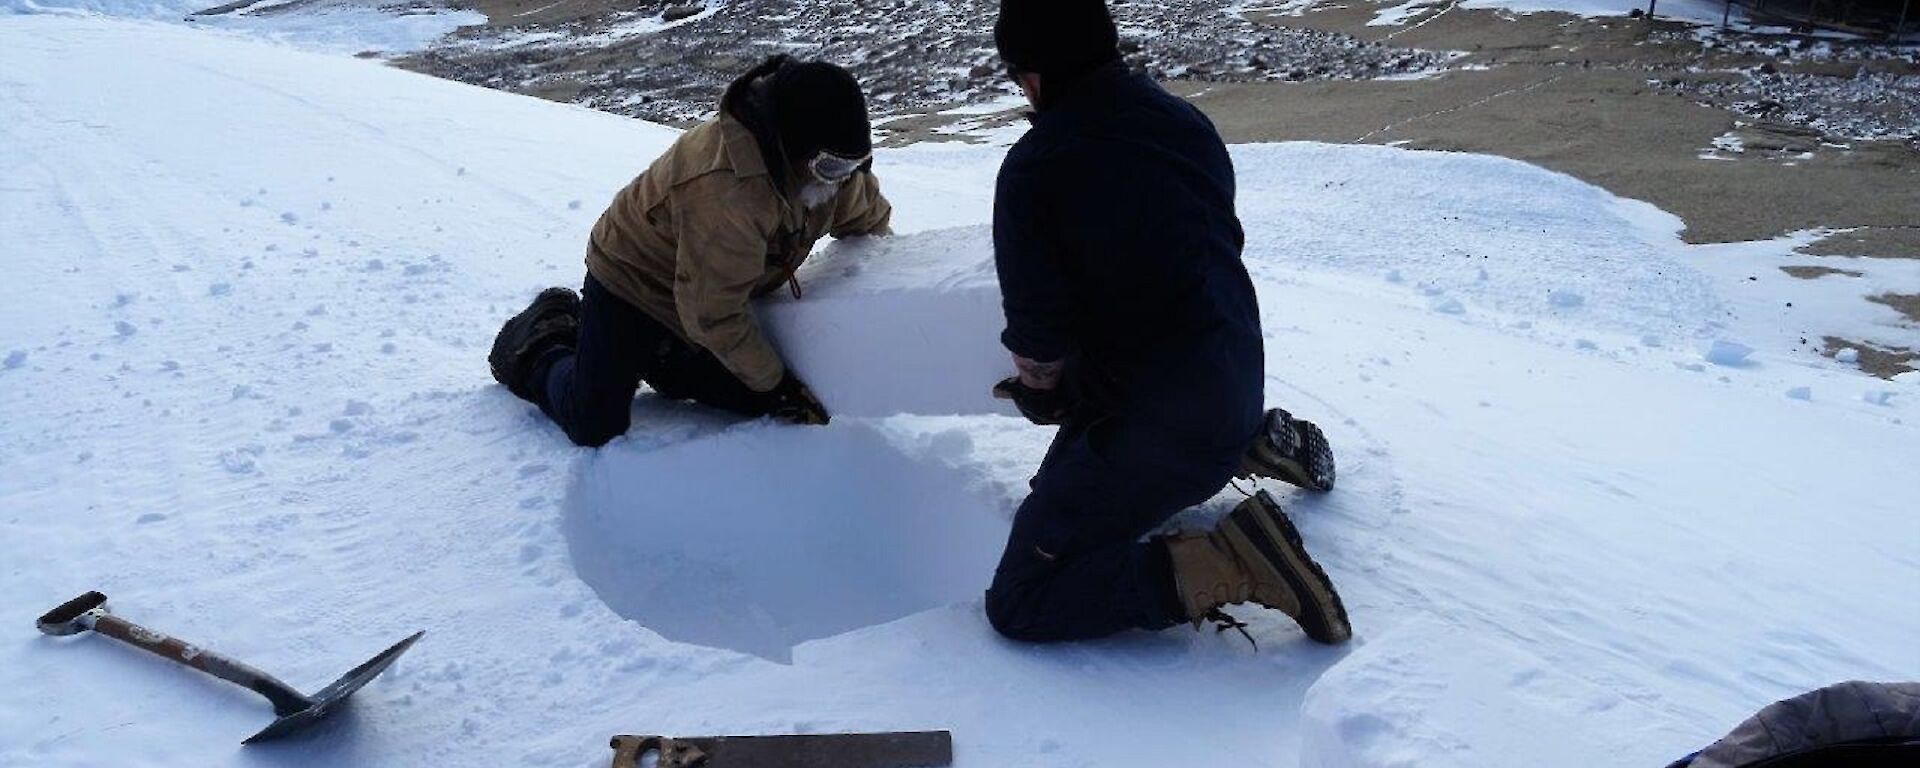 Two men cut ice blocks from an ice embankment.